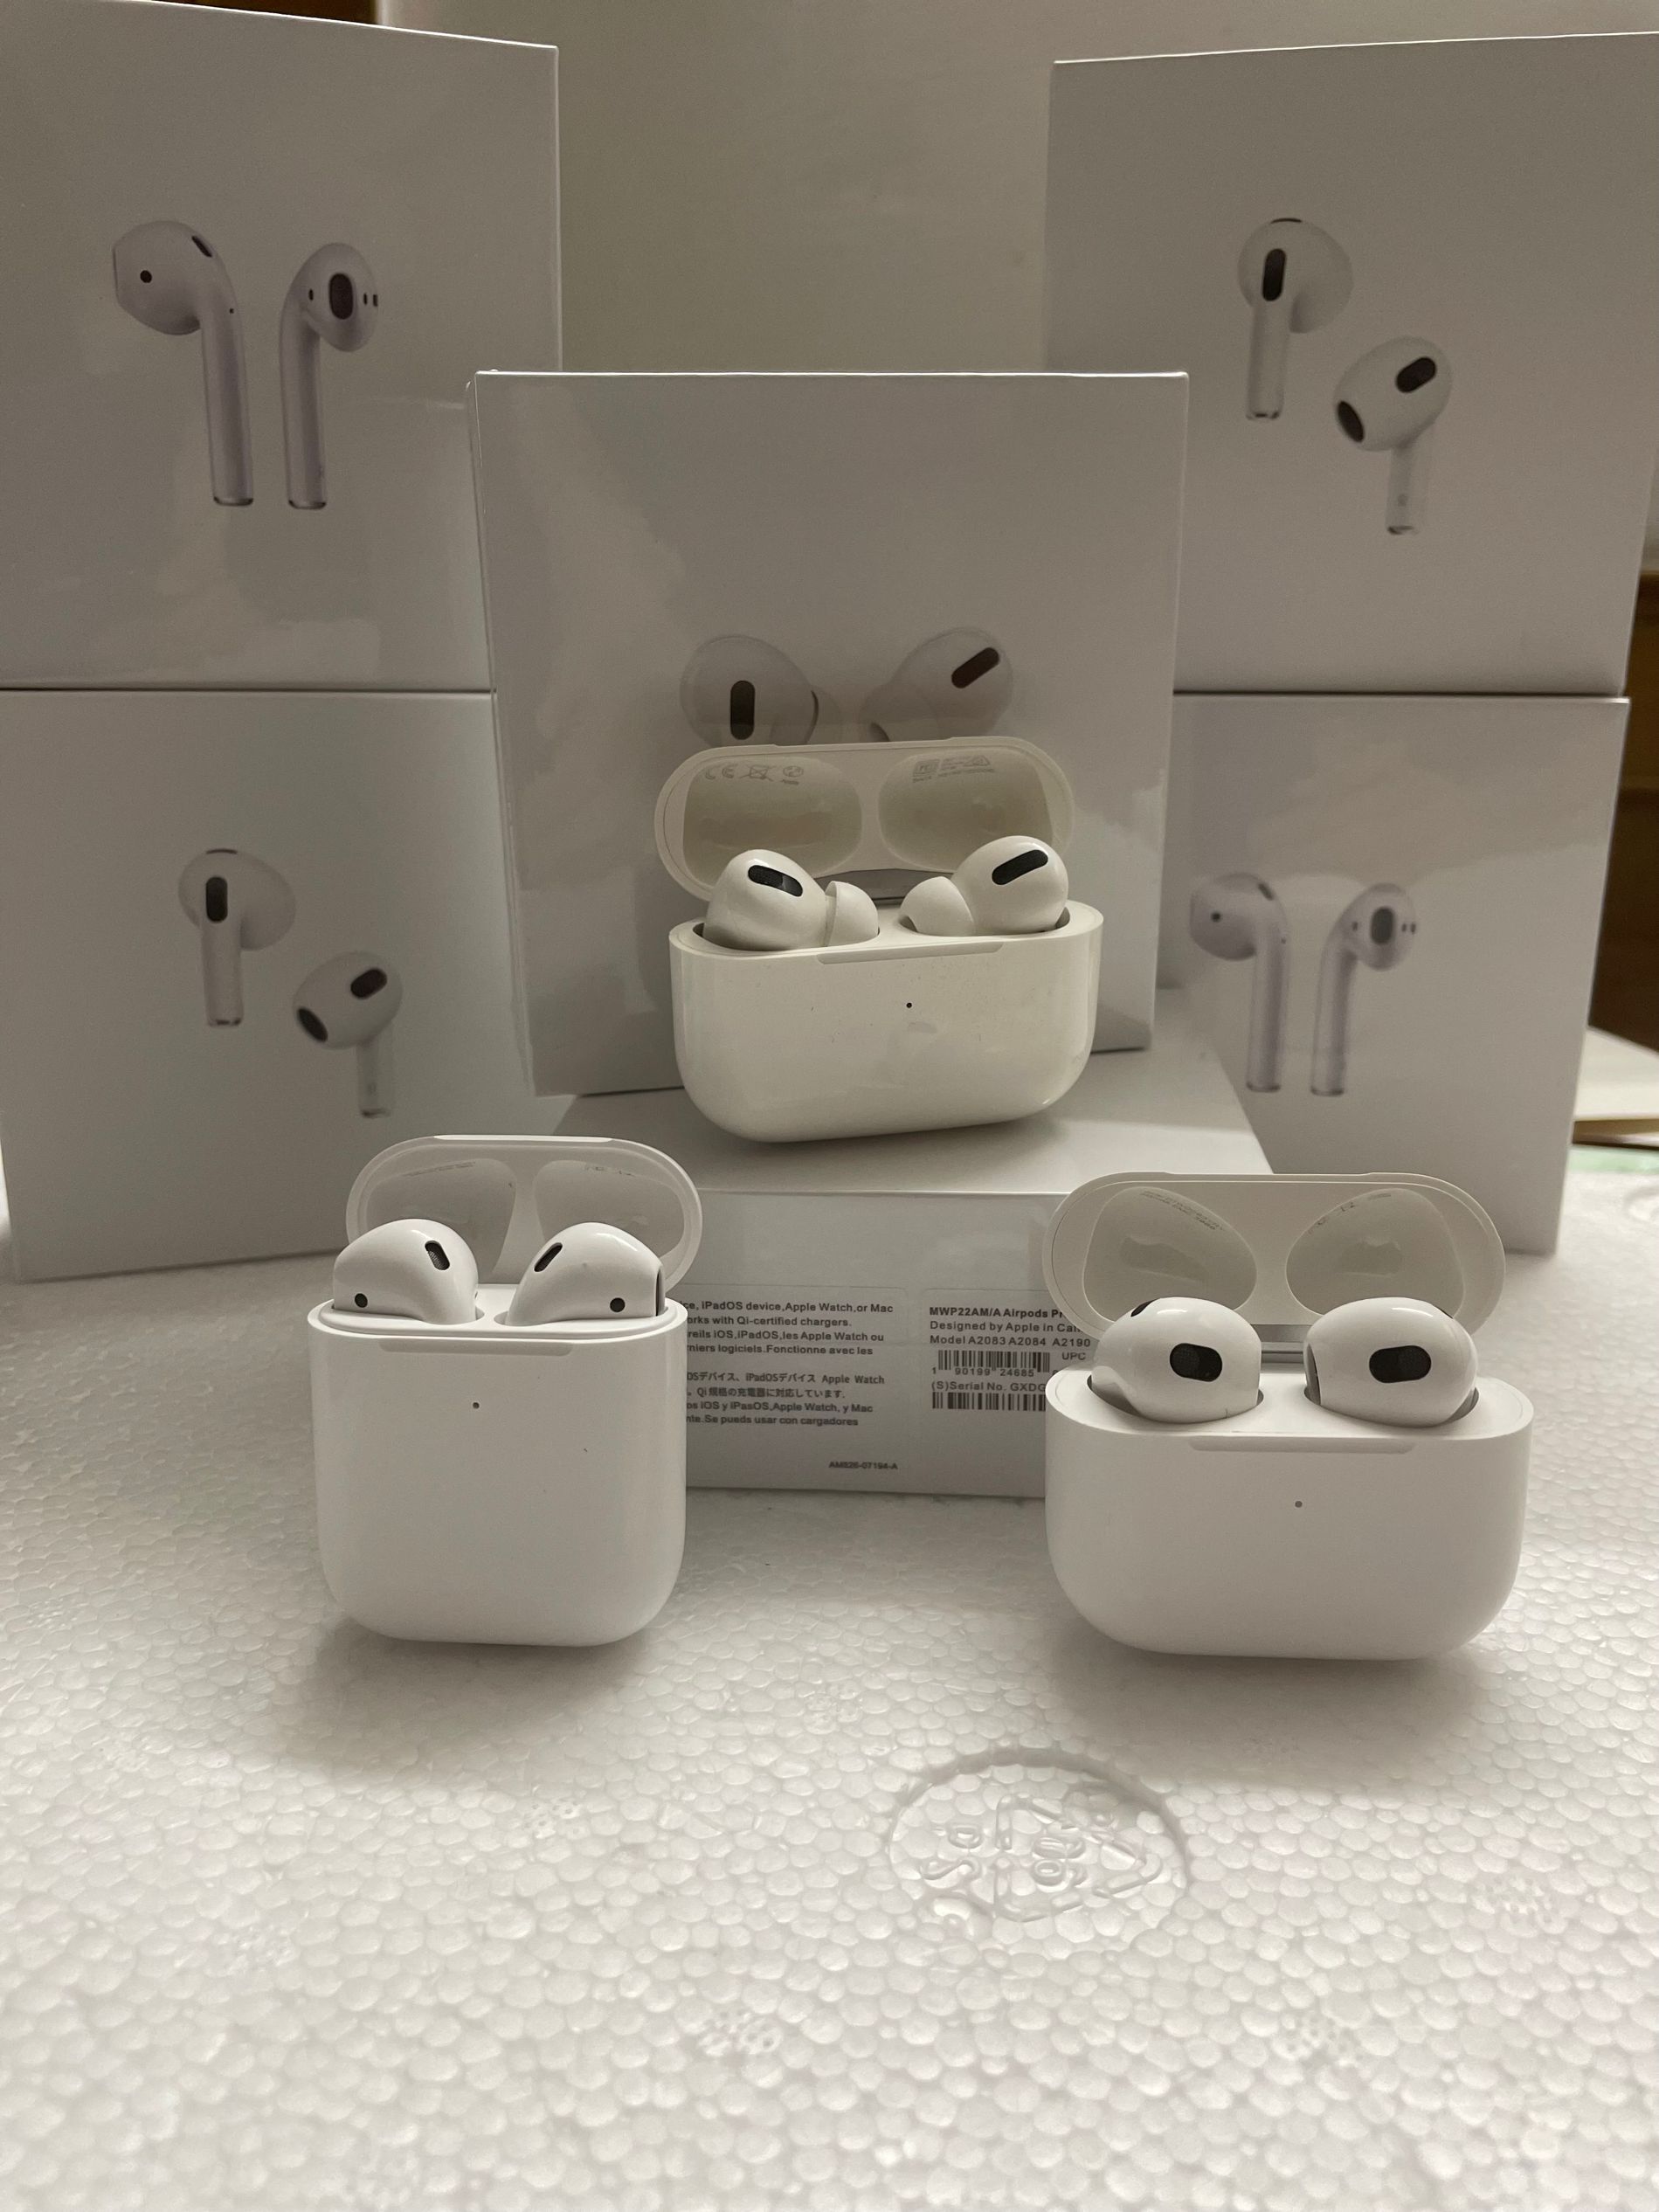 

HIGH QUALITY New Airpods 3 Airpods Pro Air Pods 1 2 Headphone Accessories Pop up Wireless Earphone fidget Soft Silicone Case airpod 2 3 Headphones Cover with Strap